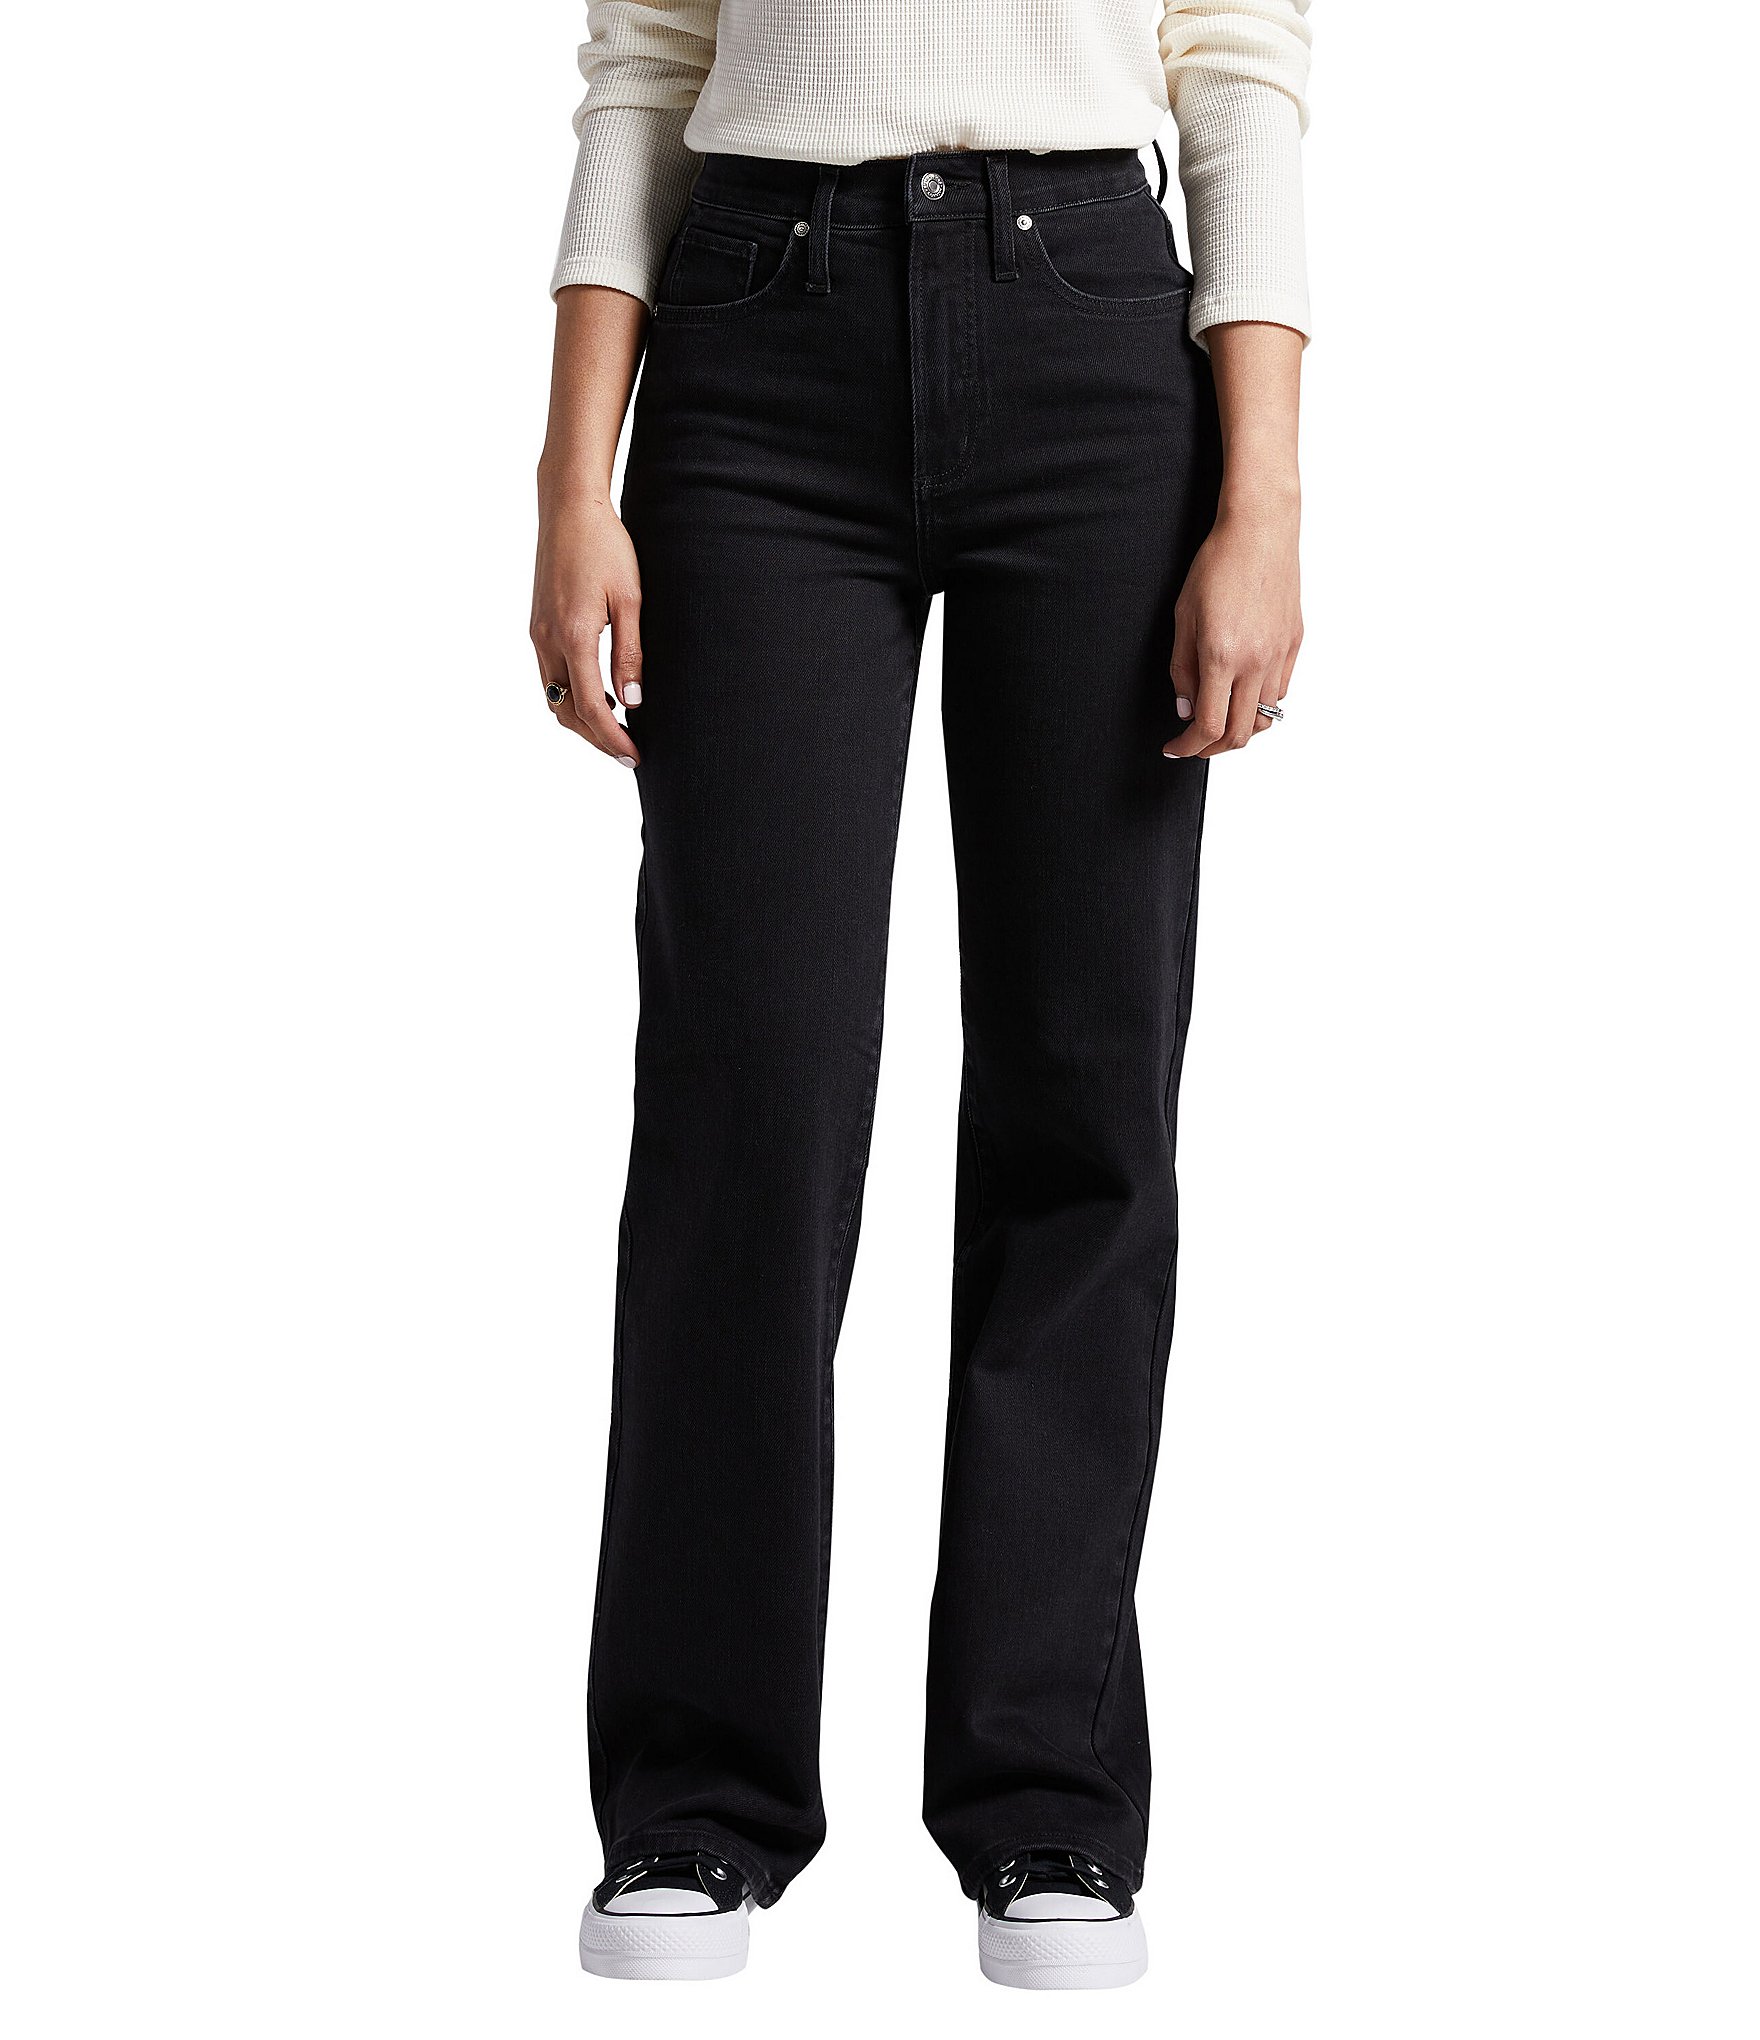 SILVER JEANS 33 HIGHLY DESIRABLE TROUSER